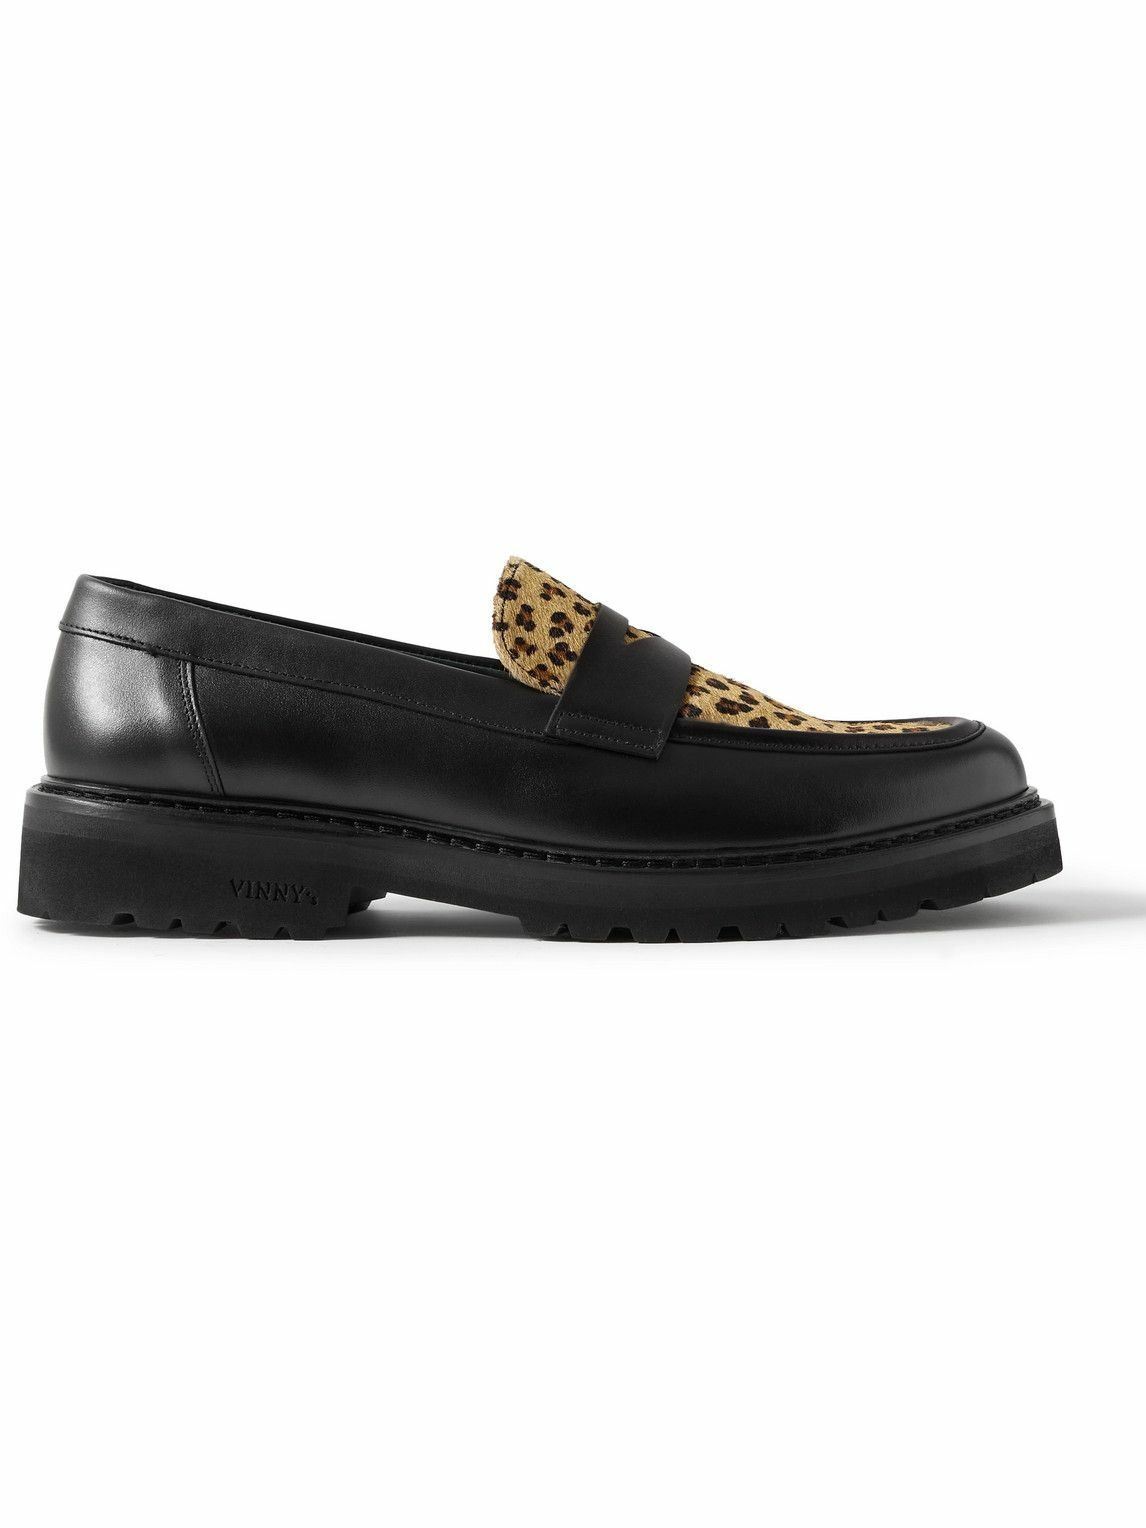 Photo: VINNY's - Richee Leopard-Print Calf Hair-Trimmed Leather Penny Loafers - Black